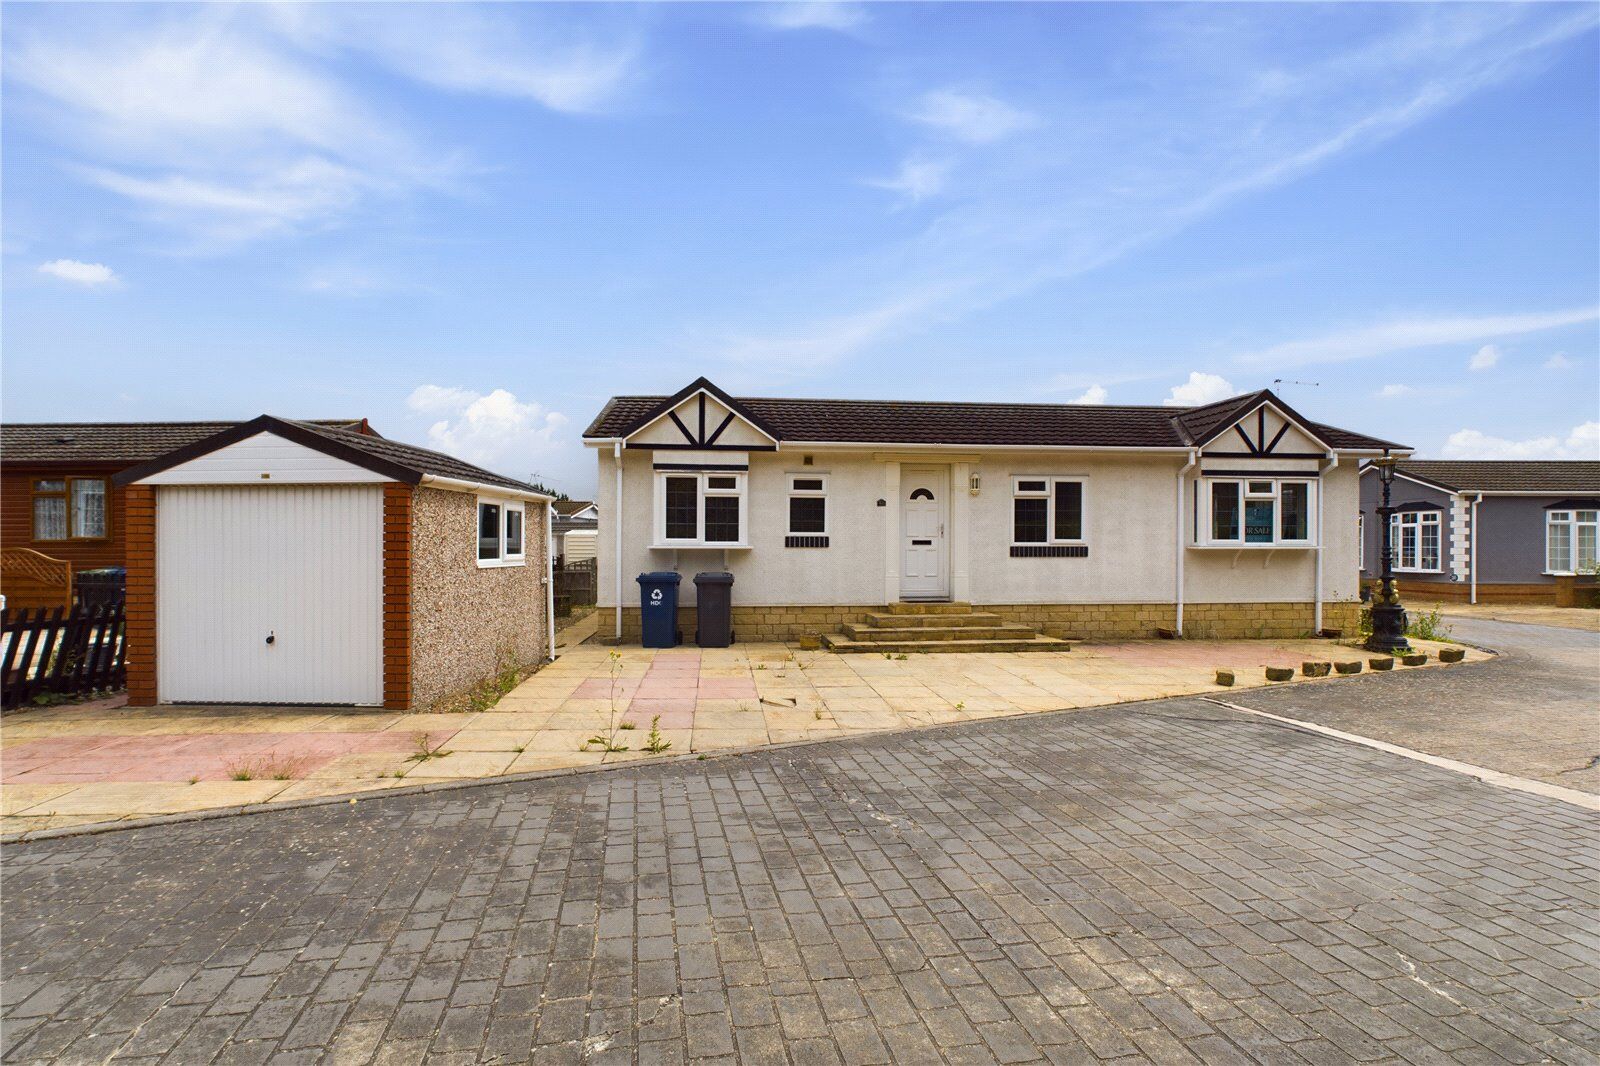 2 bedroom detached parkhome for sale Pine Hill Park, Sawtry Way, PE28, main image